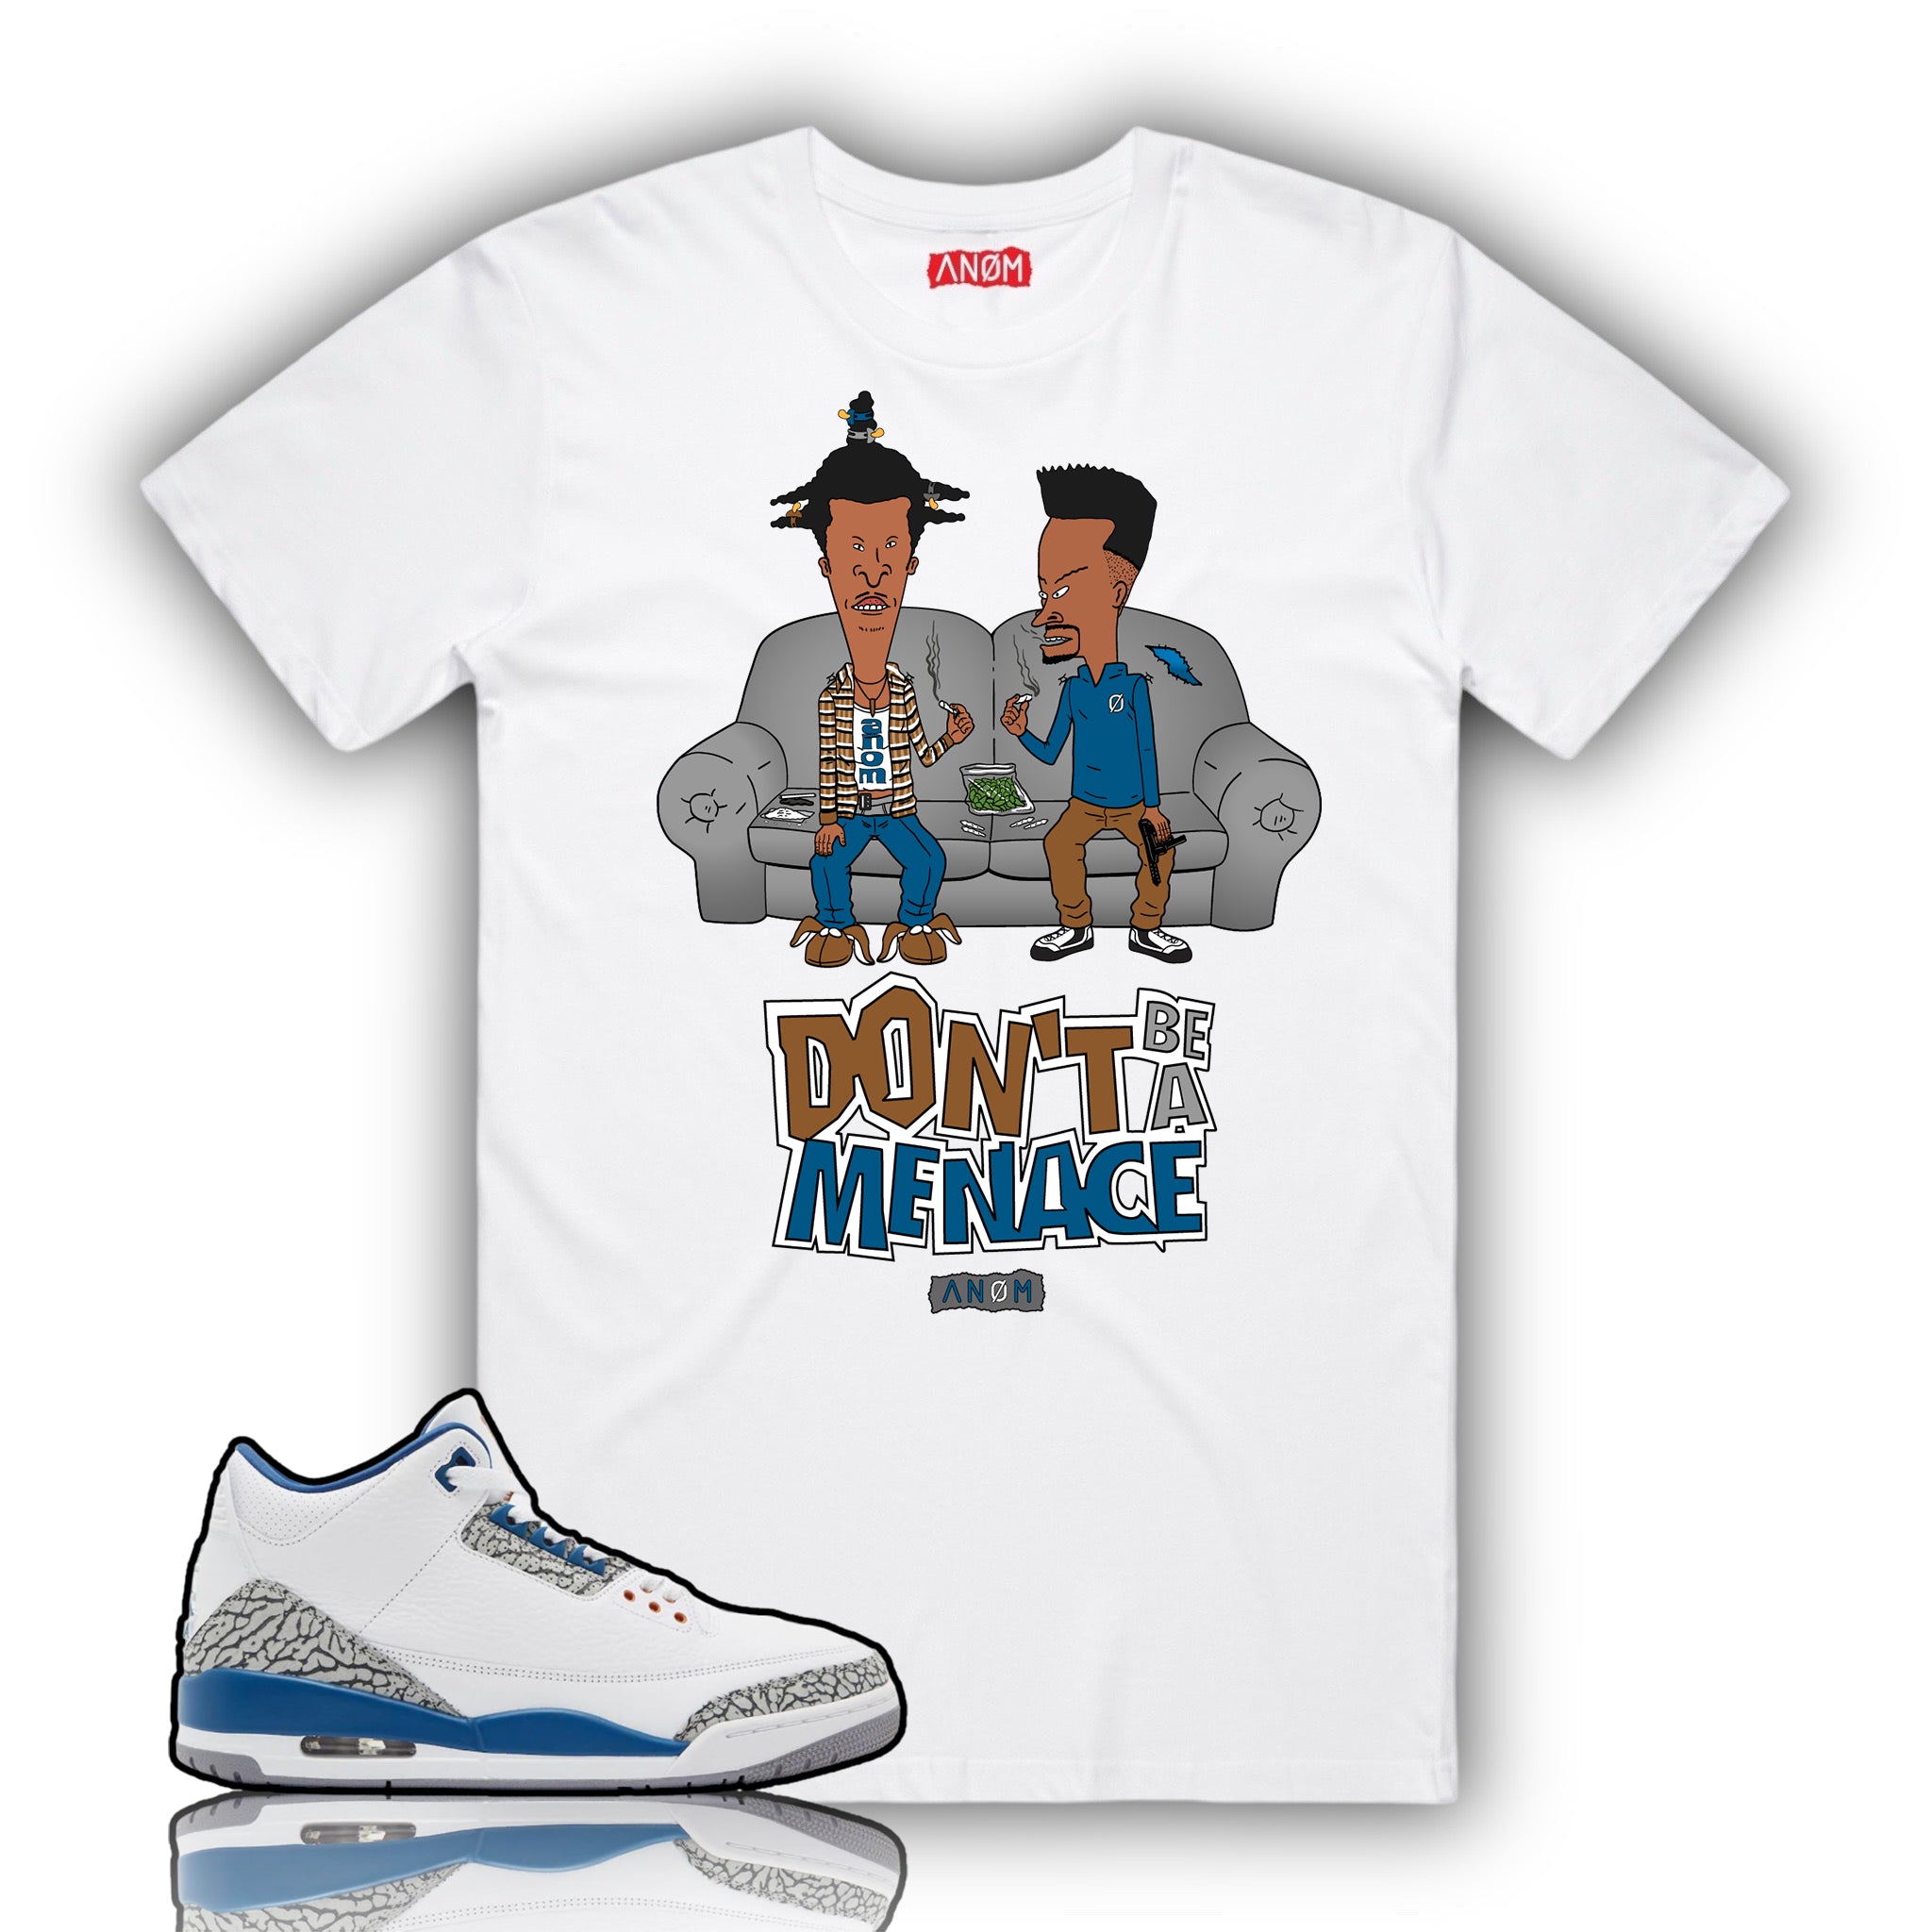 DON’T BE A MENACE TEE-J3 WIZARDS TIE/BCK